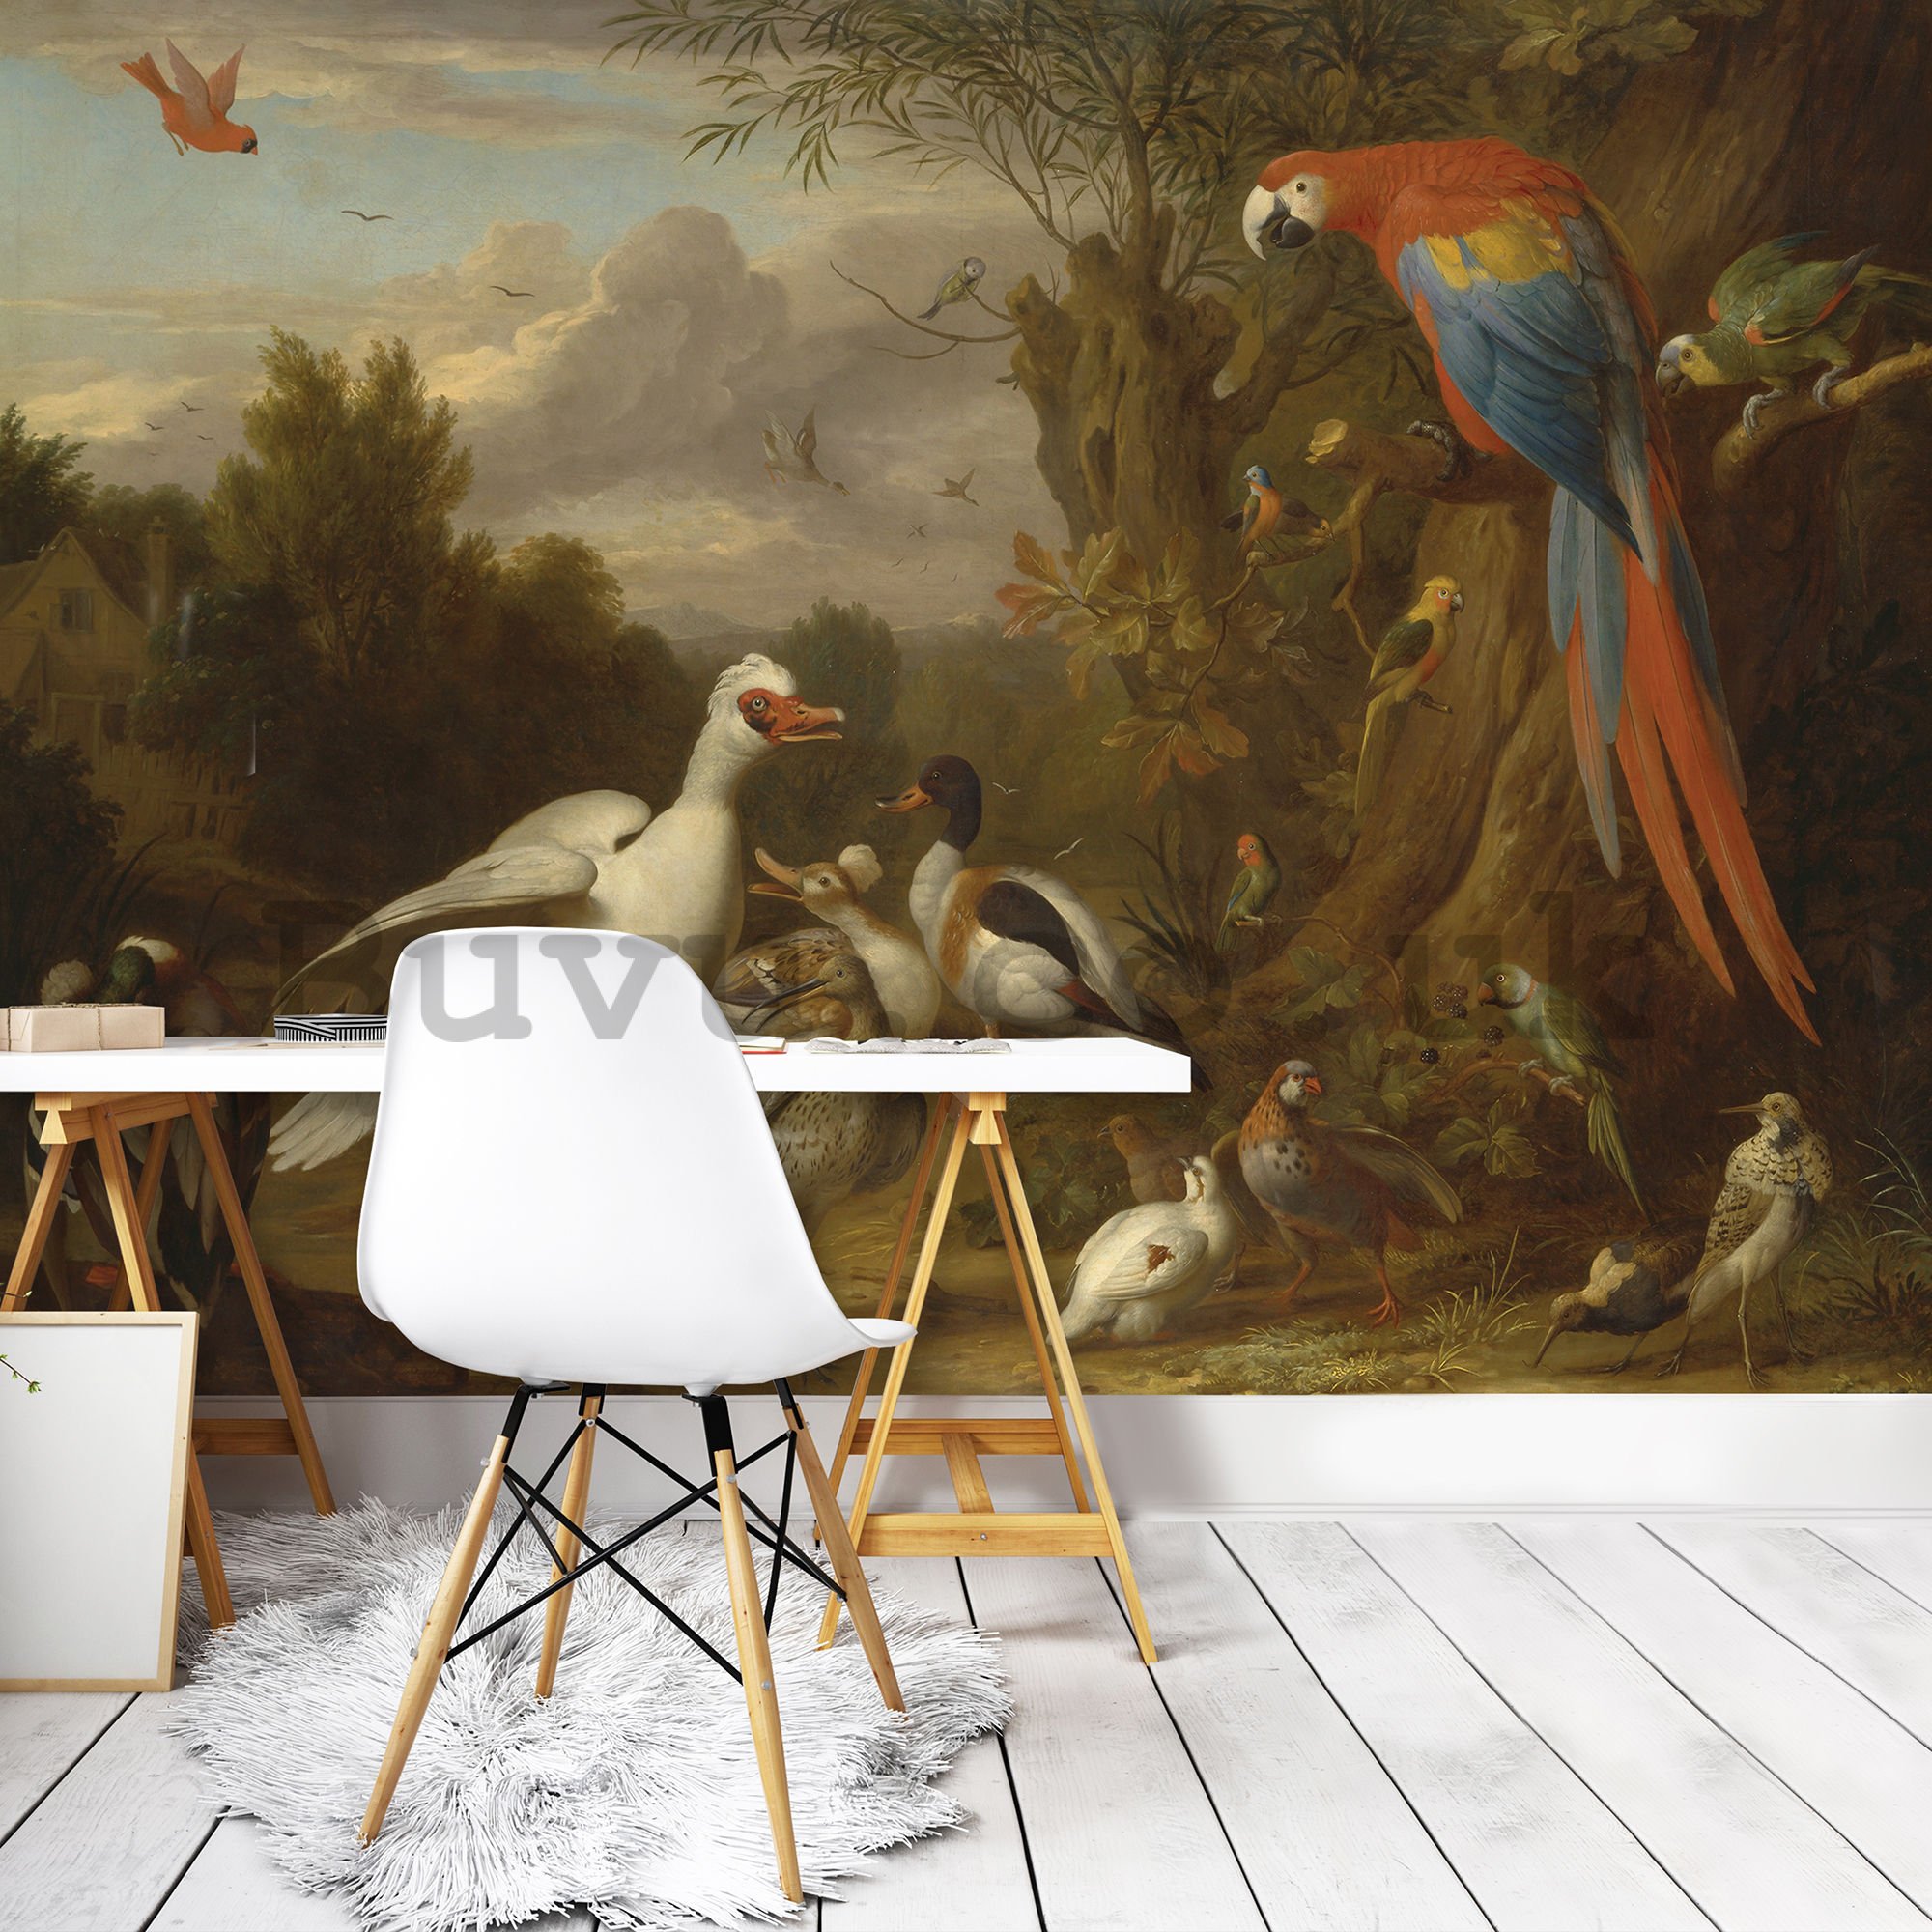 Wall mural: Ducks, Parrots, and Other Birds in a Landscape - 104x152,5 cm